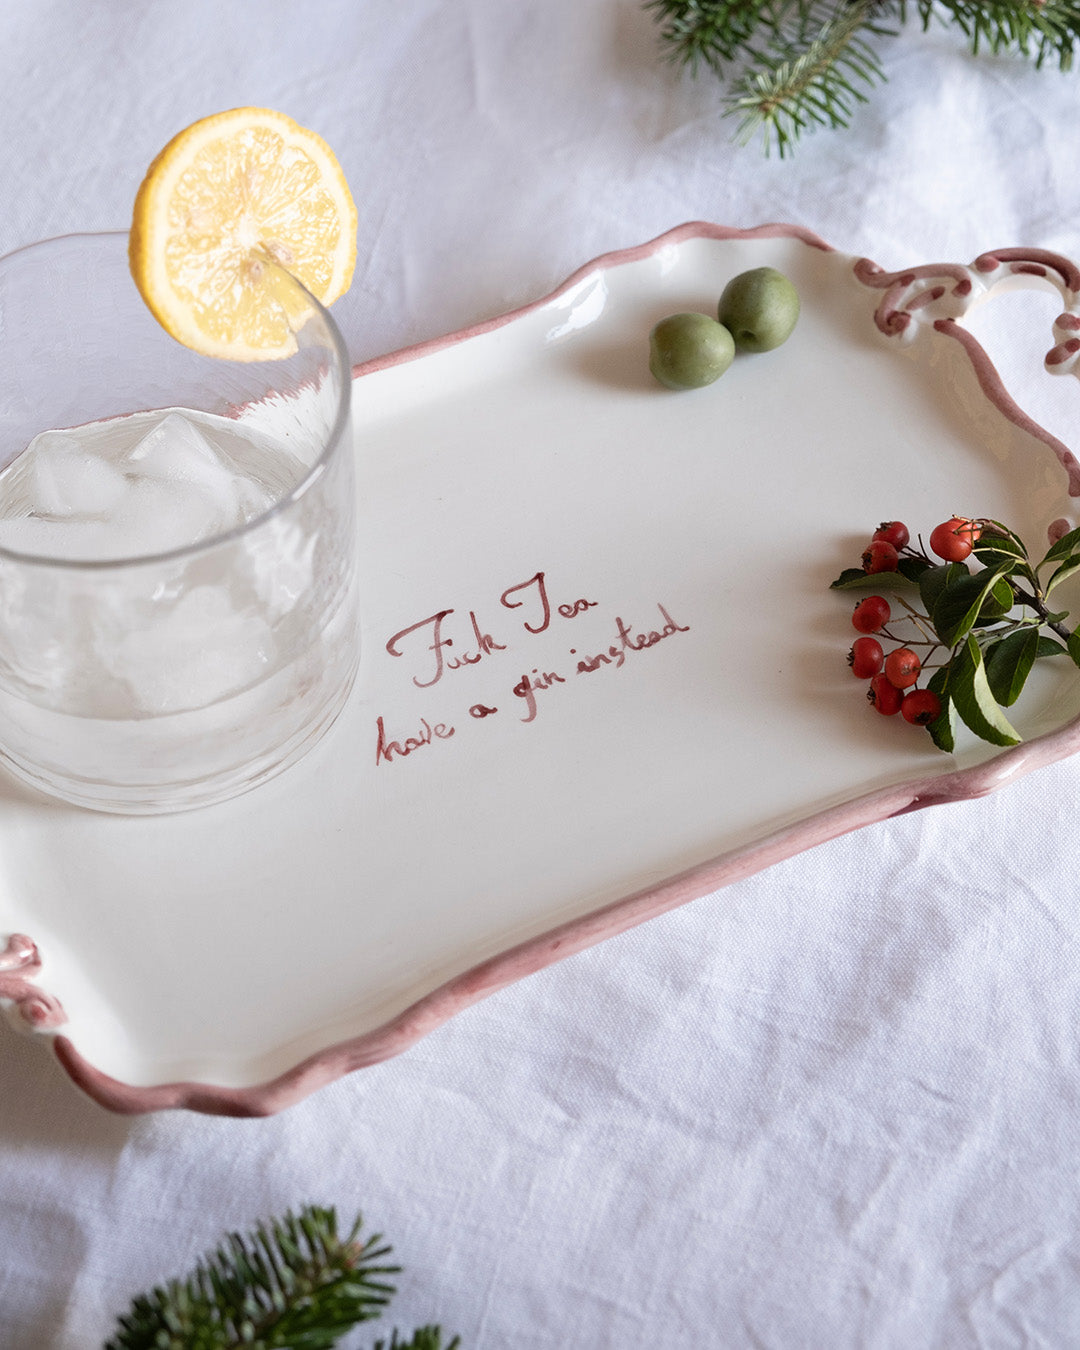 "Fuck Tea, have a gin instead" tray